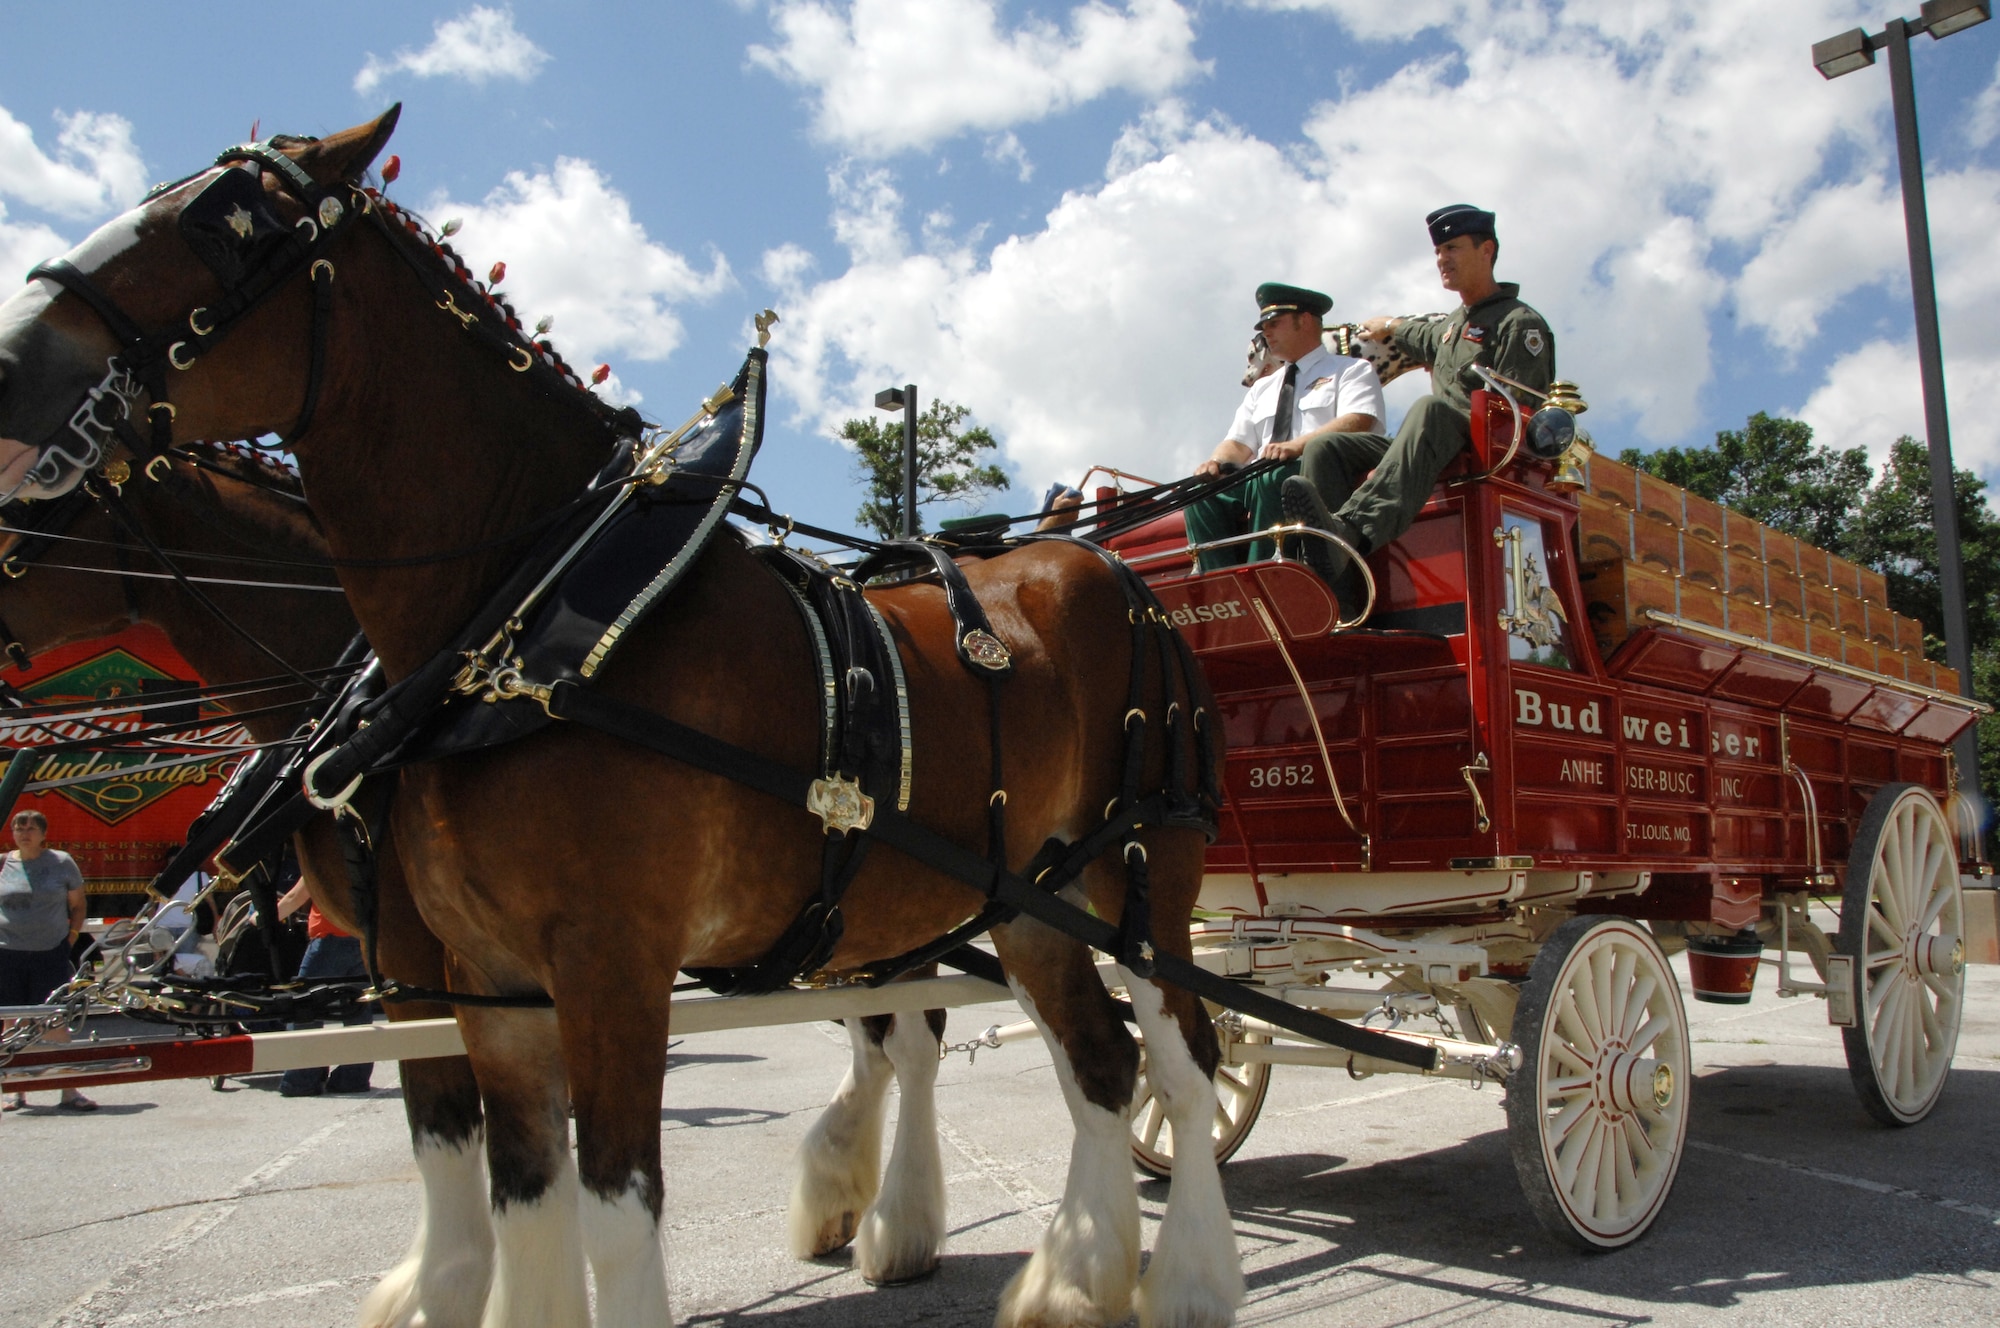 55th Wing Commander Brig. Gen. Jim Jones travels in style on a wagon pulled by the Budweiser Clydesdale horses. The Budweiser team was at Offutt as part of their effort to show support for military men and women. (U. S. Air Force Photo By/Dana P. Heard)